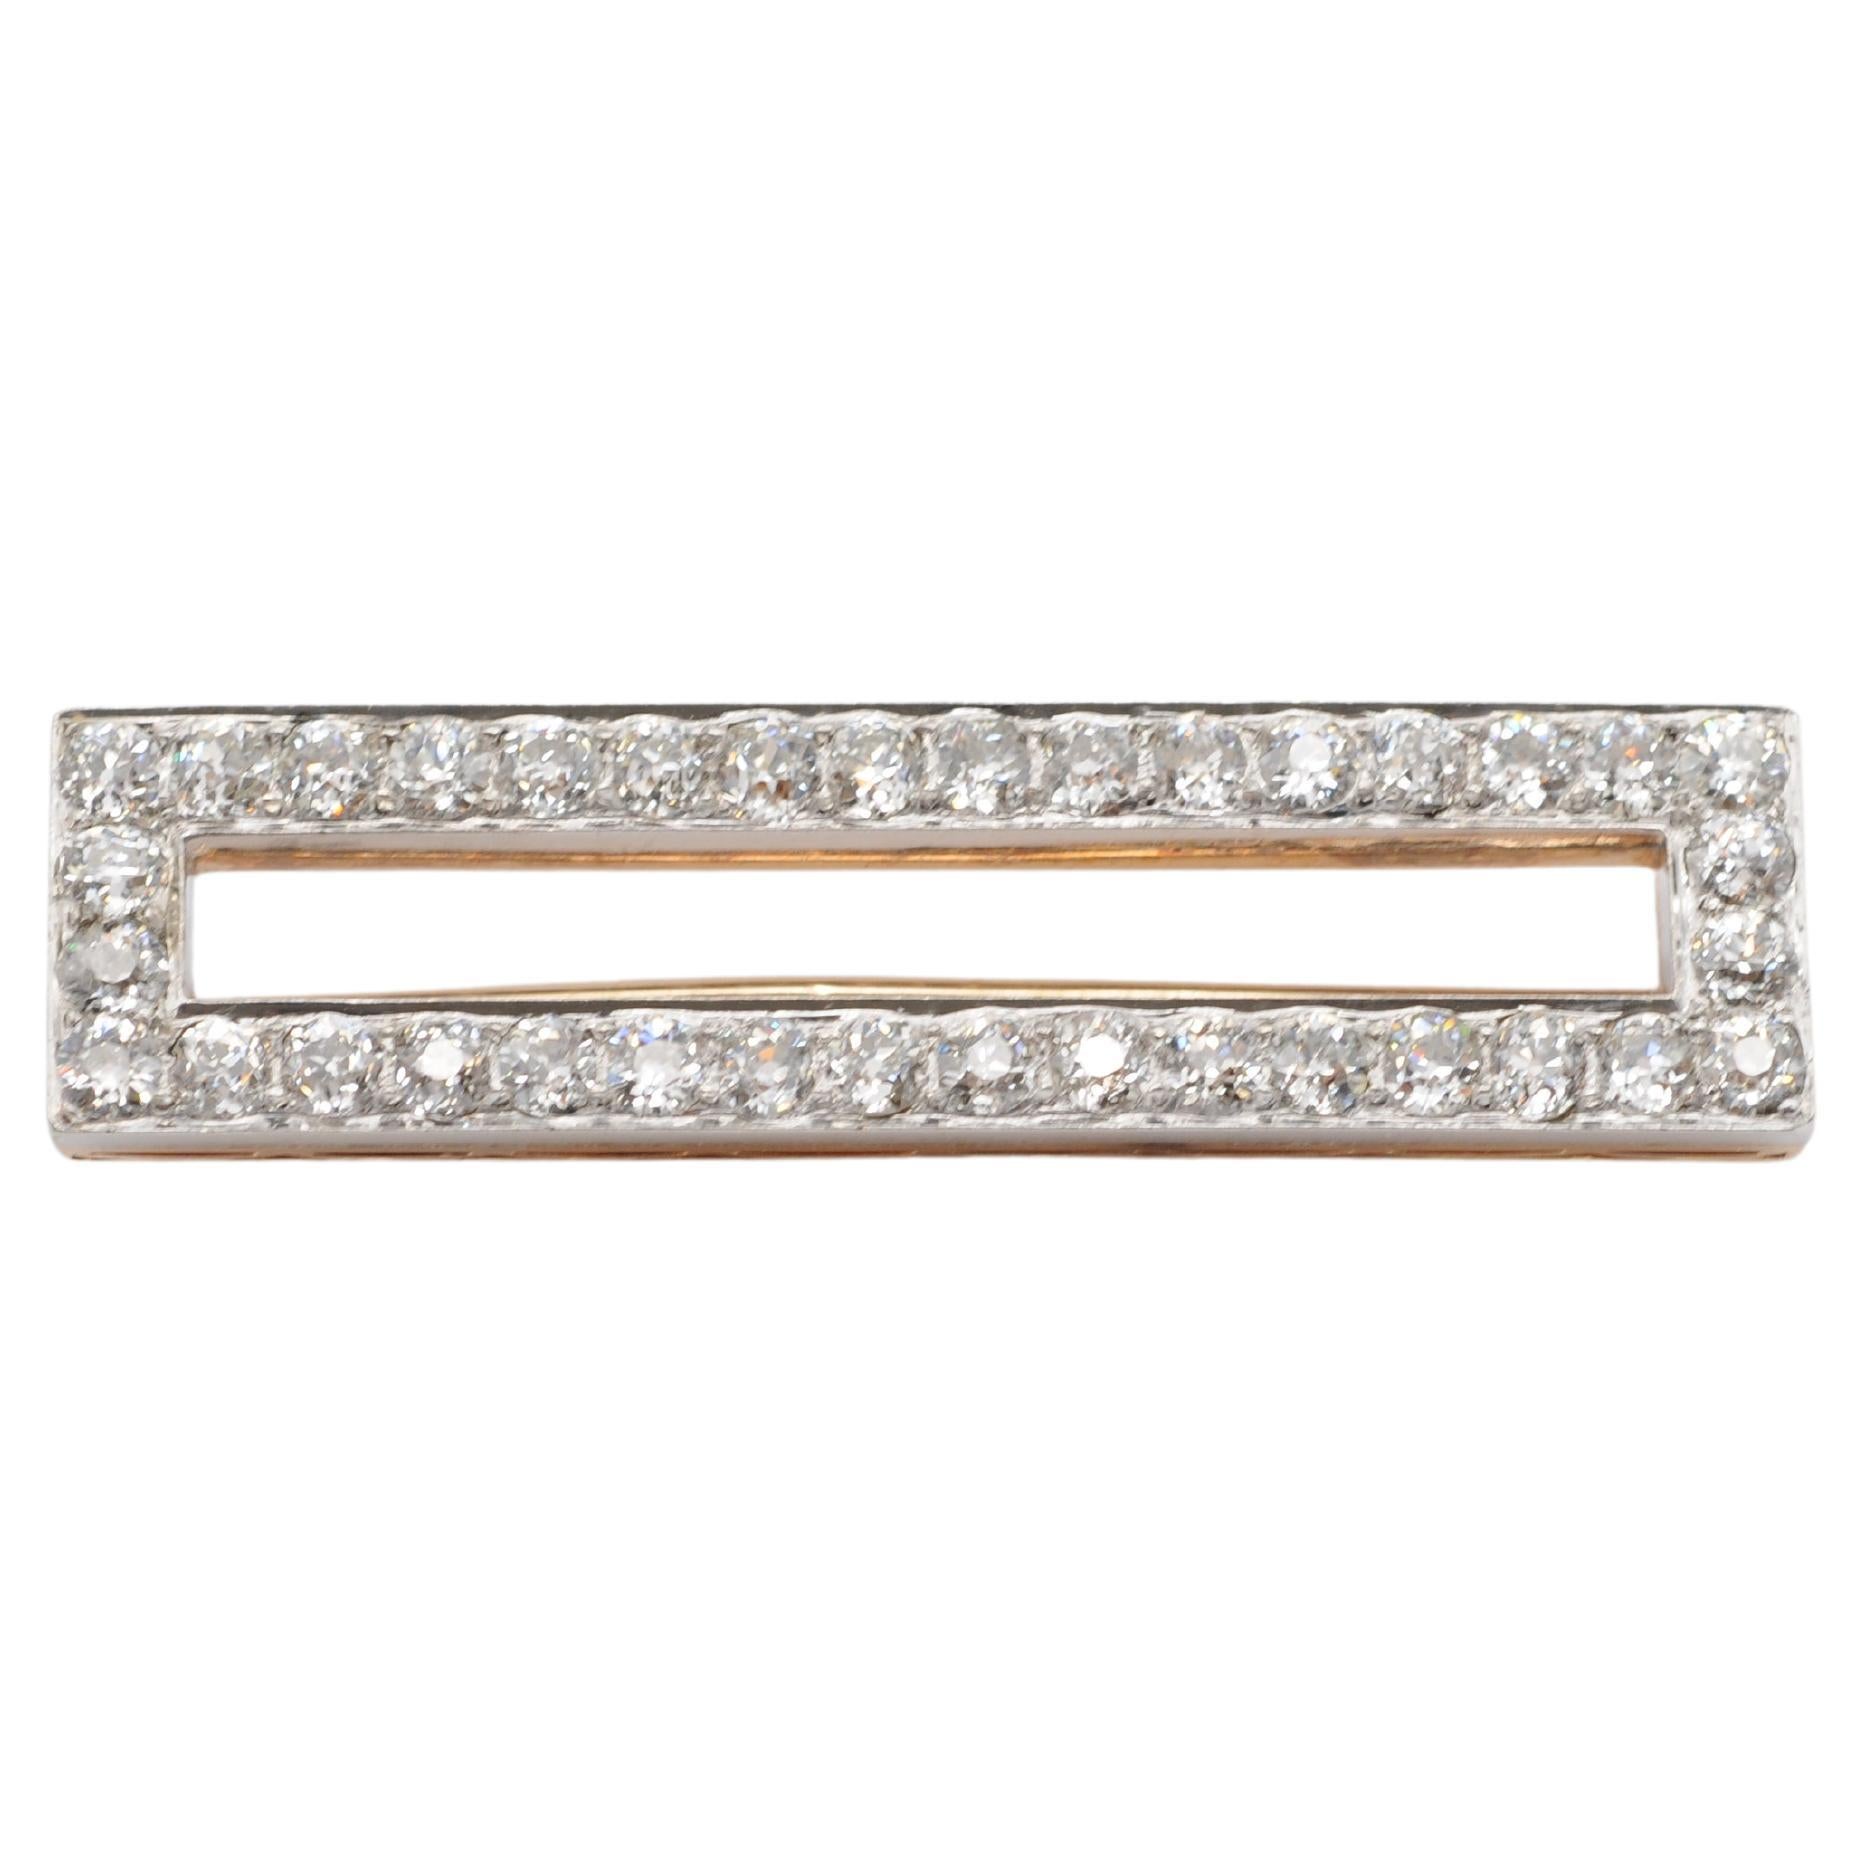 Prepare to be enchanted by the timeless elegance of this breathtaking 18k rose and white gold brooch. Adorned with a total of 36 old-cut diamonds, each shimmering with a weight ranging from approximately 0.10ct to 0.13ct and boasting a clarity of